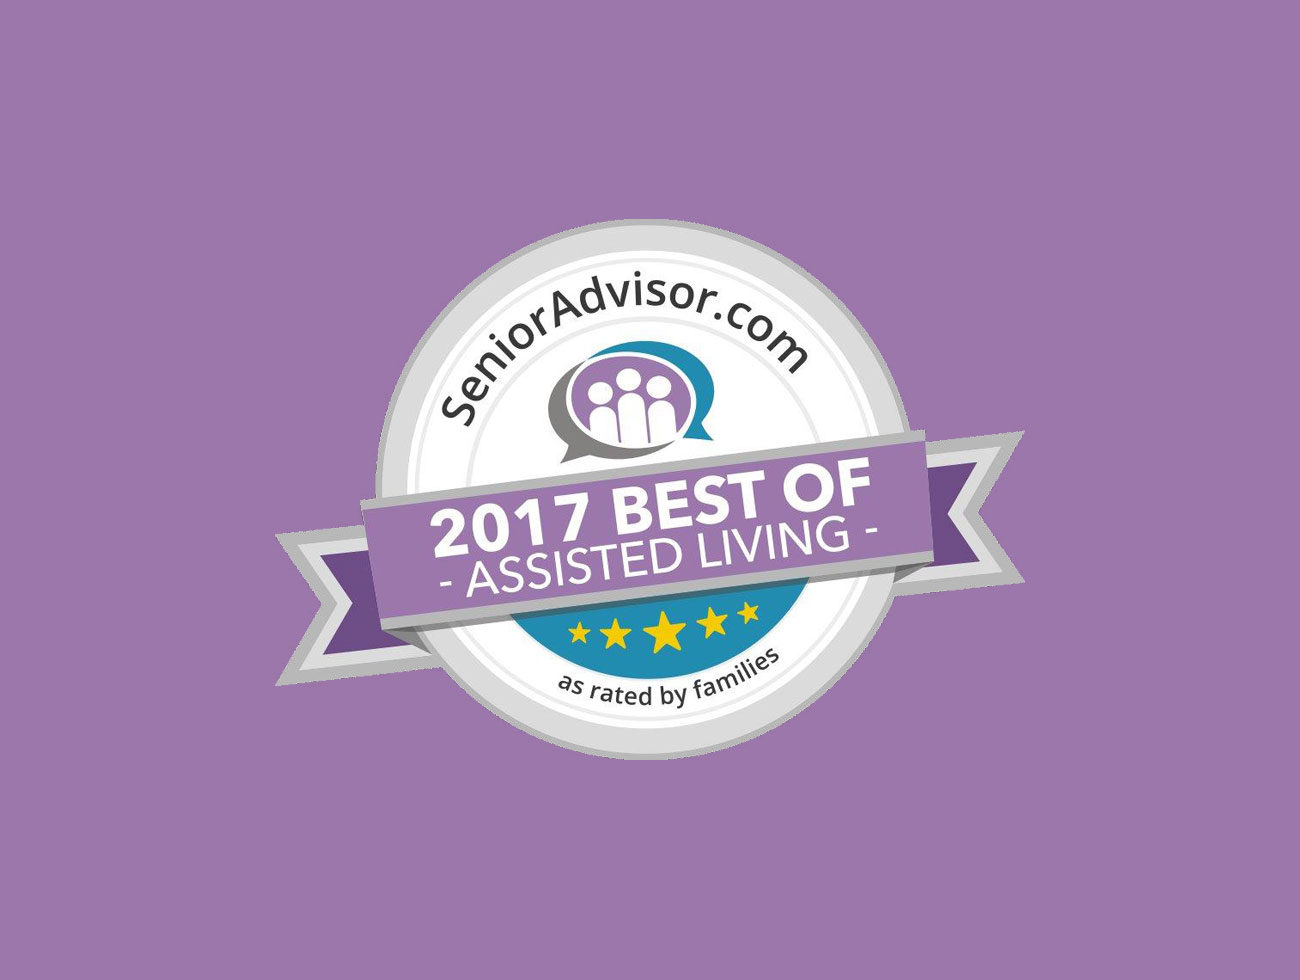 senioradvisor.com 2017 Best of Assisted Living as rated by families